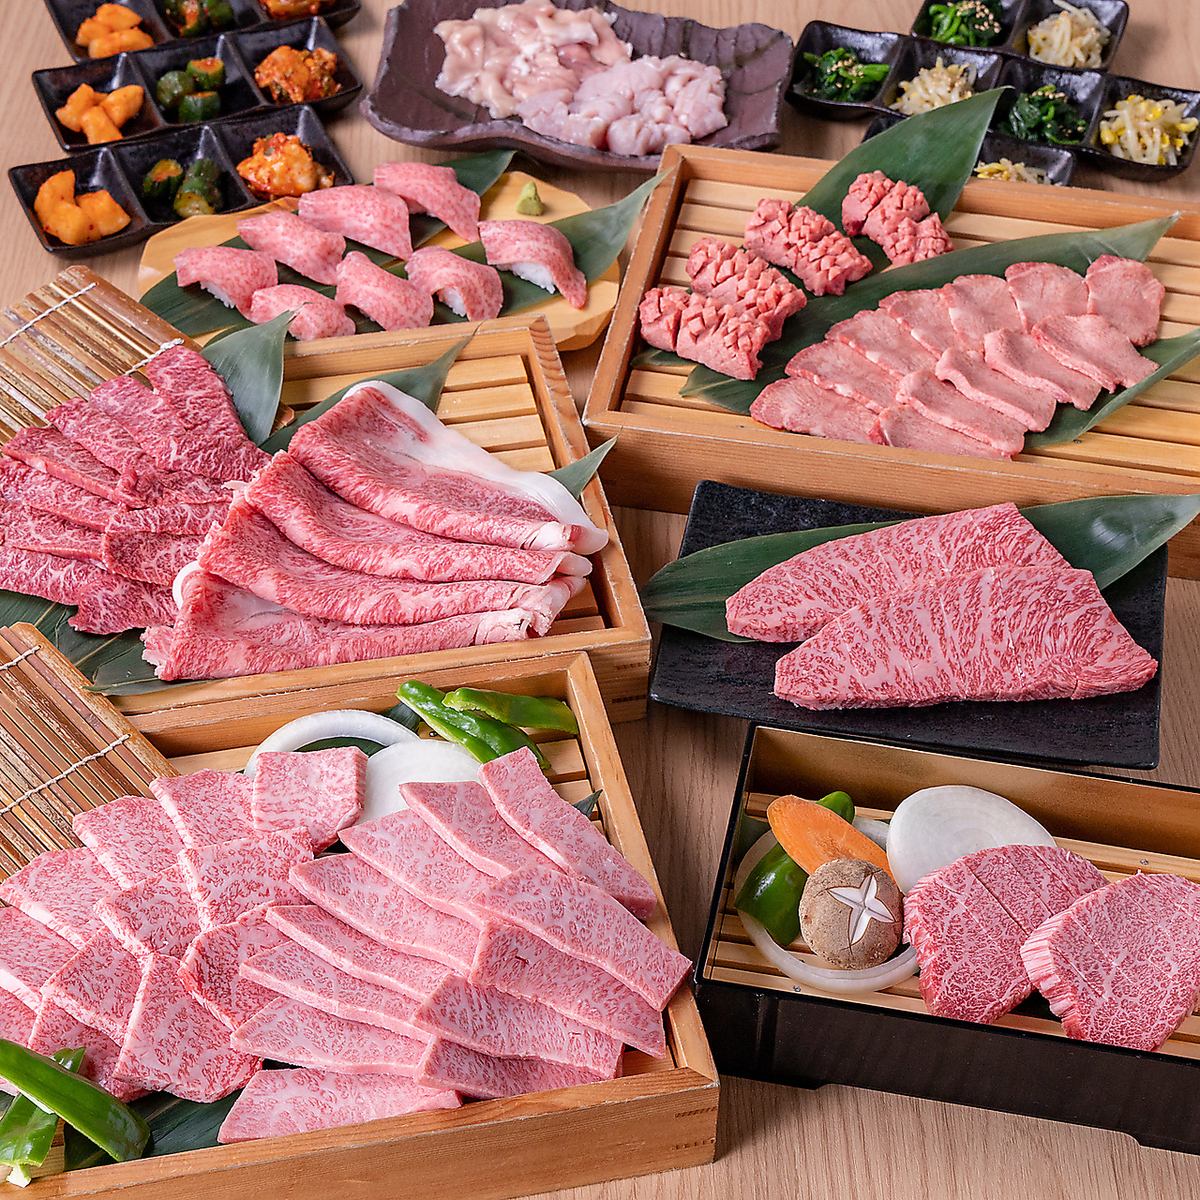 ☆Soft, juicy thick-sliced shio tongue and chateaubriand are exquisite☆